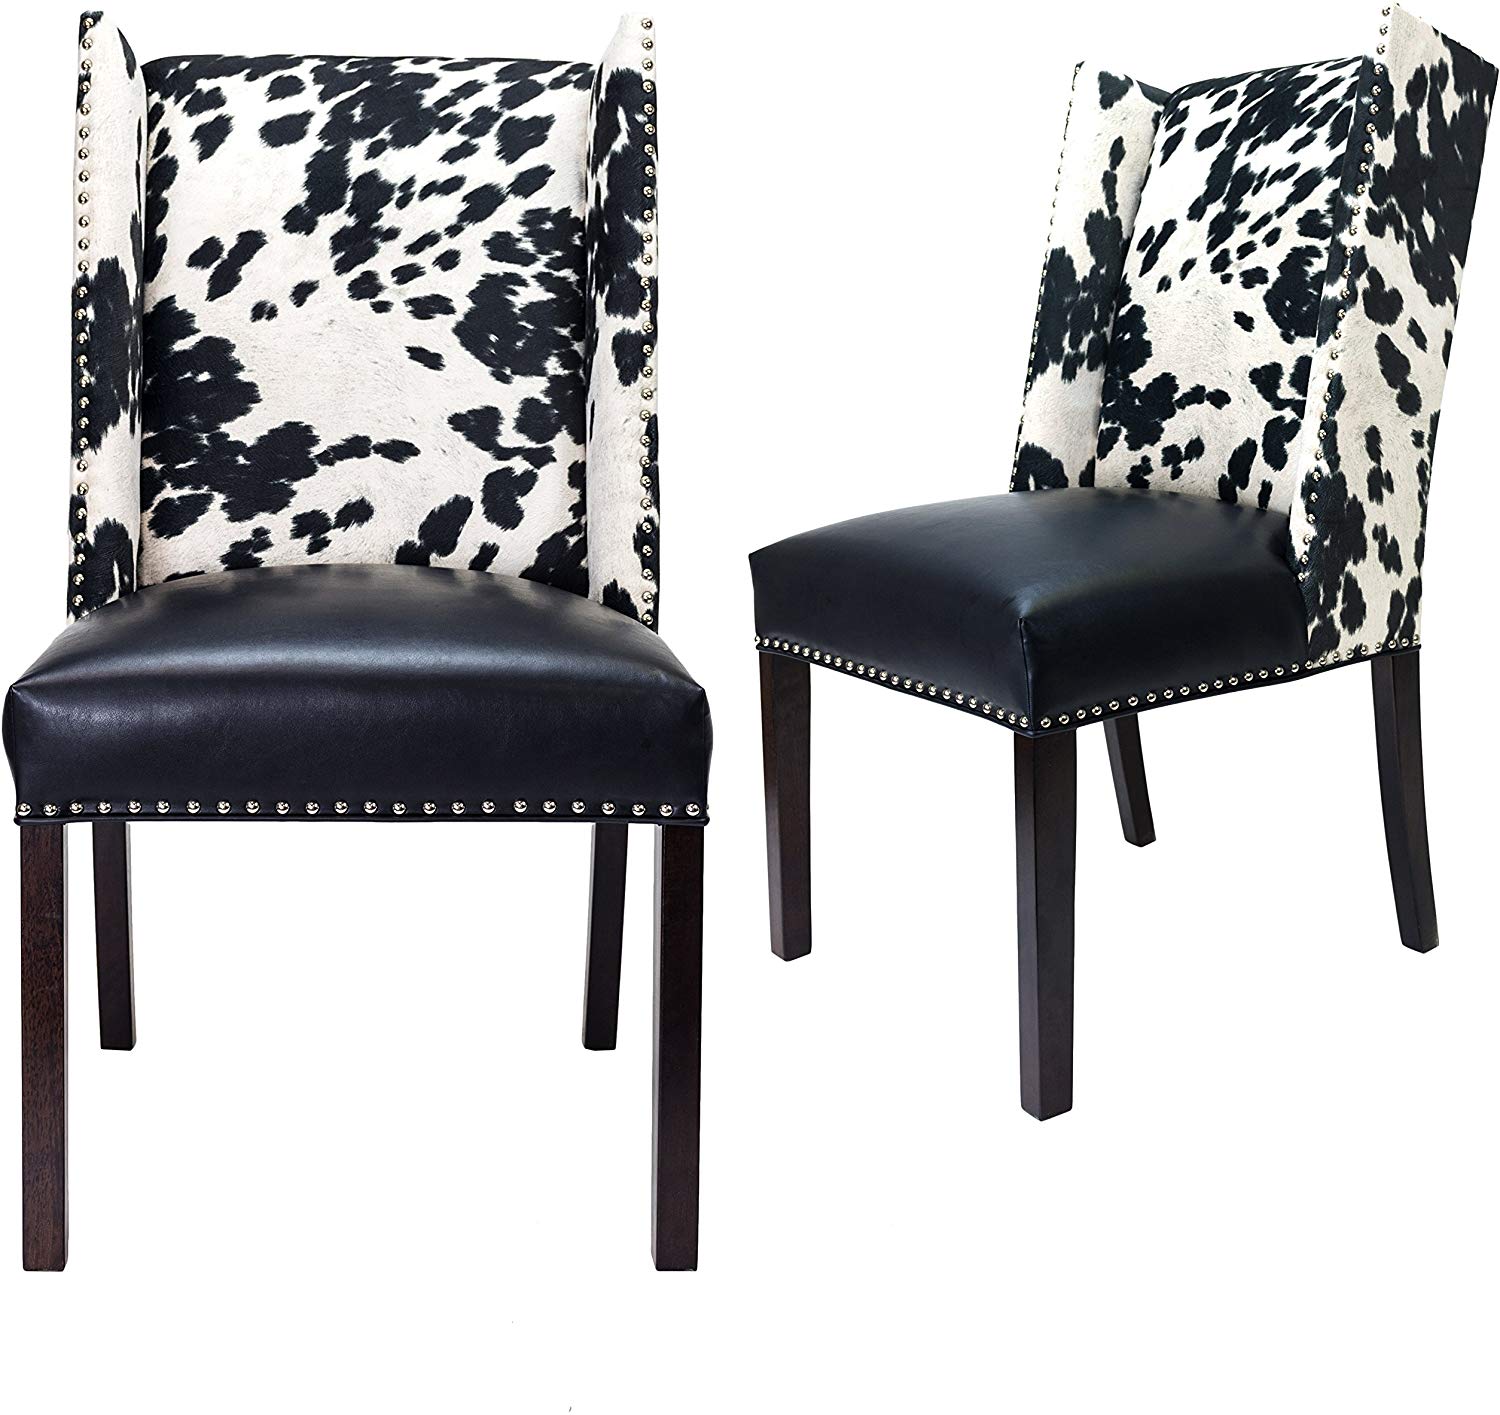 Chic Designs Rexford Faux Cowhide Leather And Fabric Upholstered